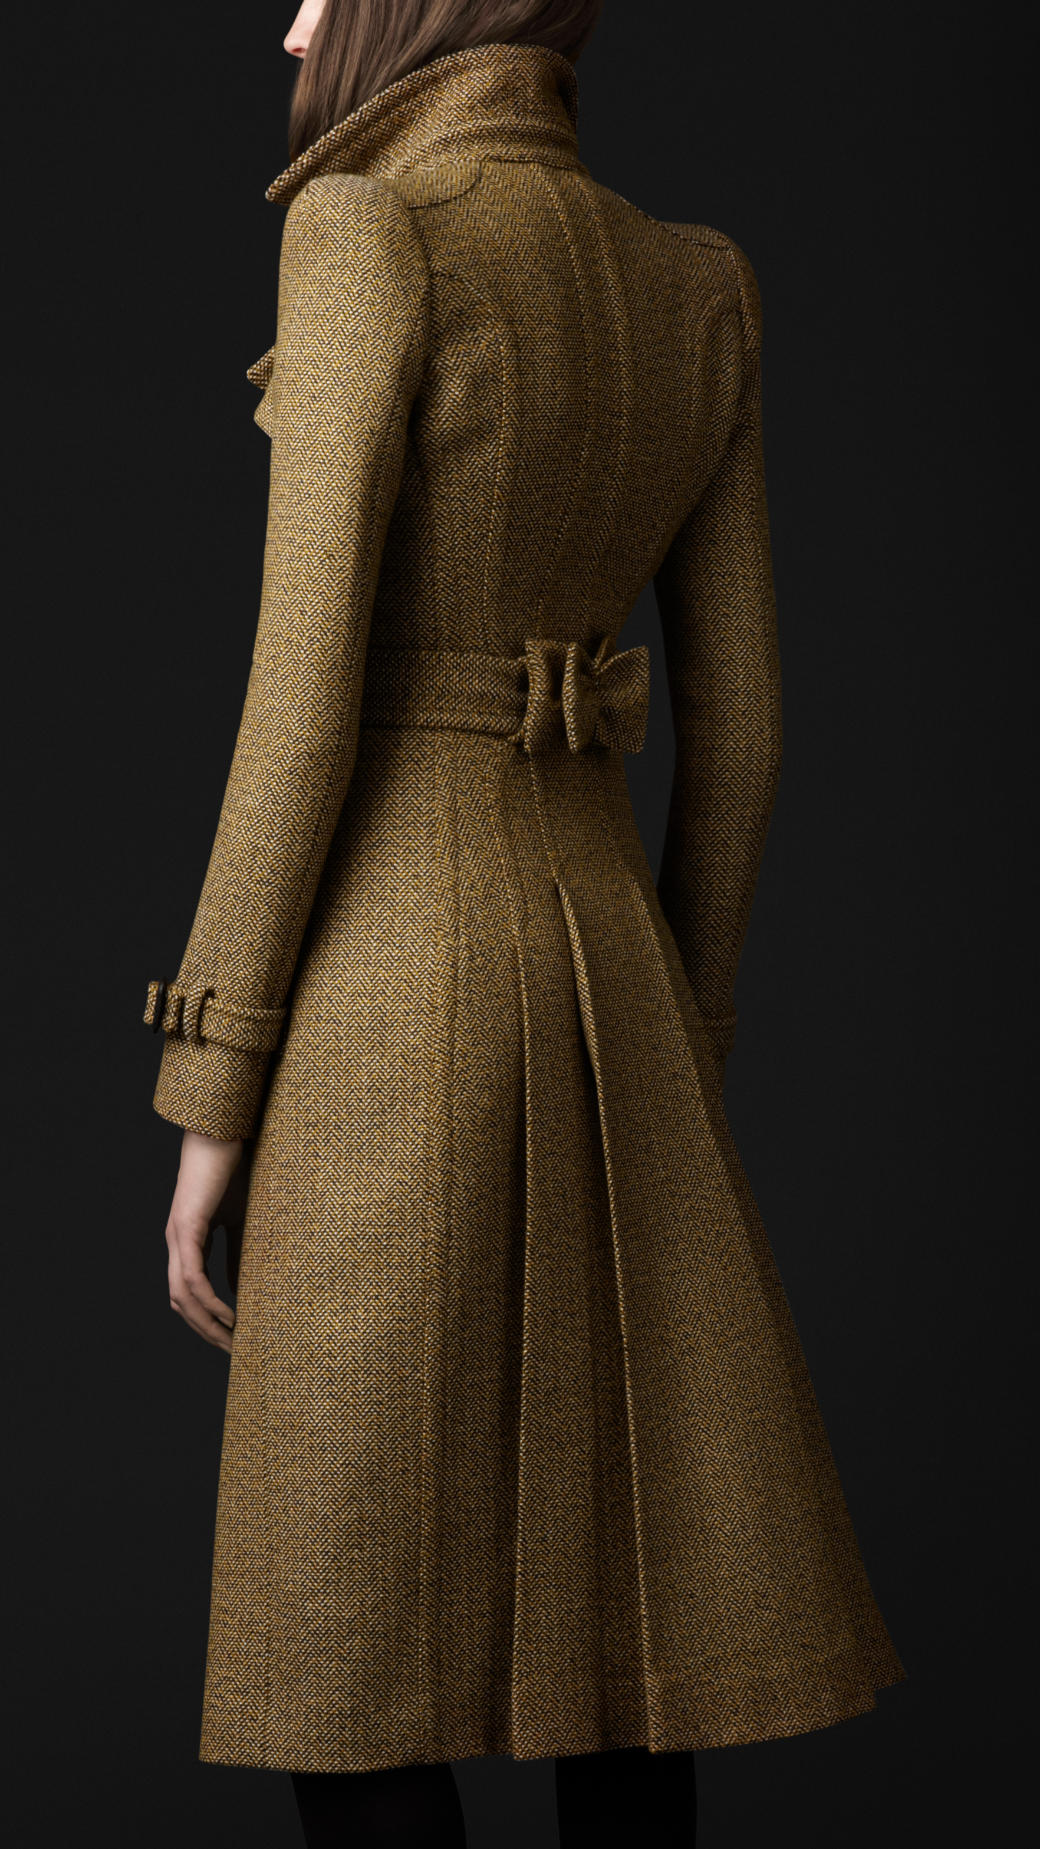 Burberry Prorsum Tailored Wool Trench Coat in Natural | Lyst